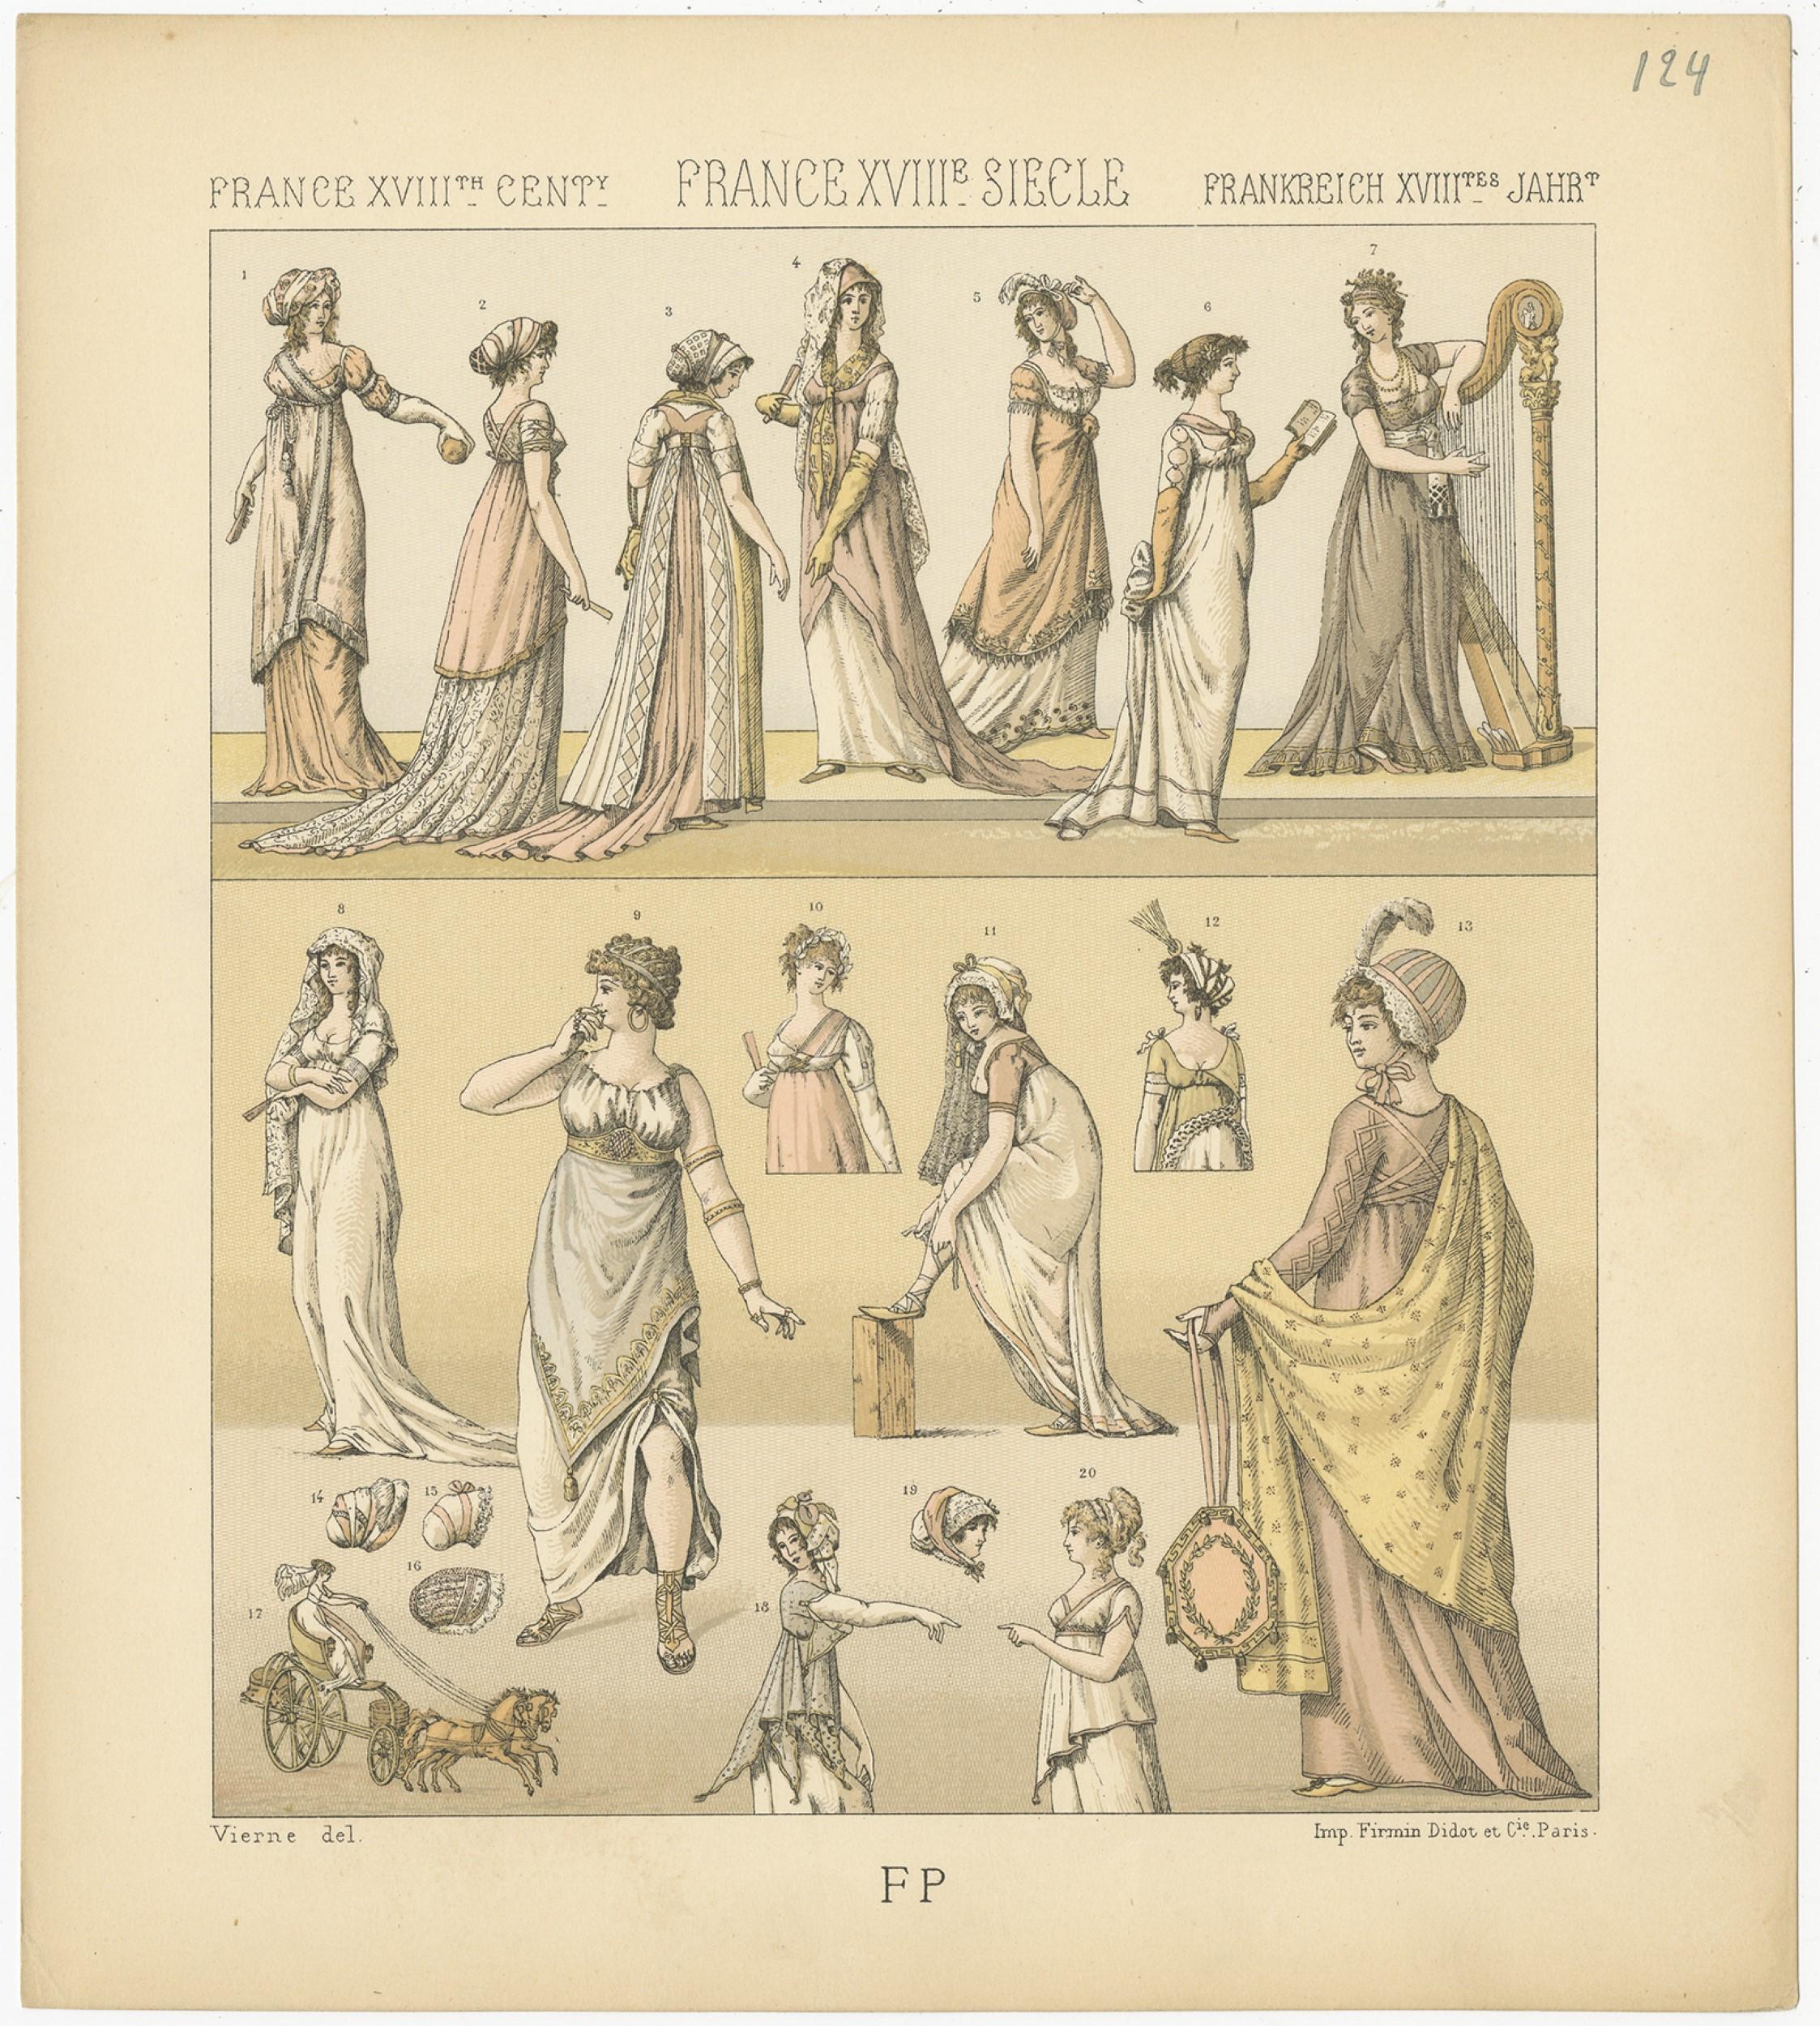 Antique print titled 'France XVIIIth Cent - France XVIIIe, Siecle - Frankreich XVIIItes Jahr'. Chromolithograph of French 18th century women's costumes. This print originates from 'Le Costume Historique' by M.A. Racinet. Published, circa 1880.
  